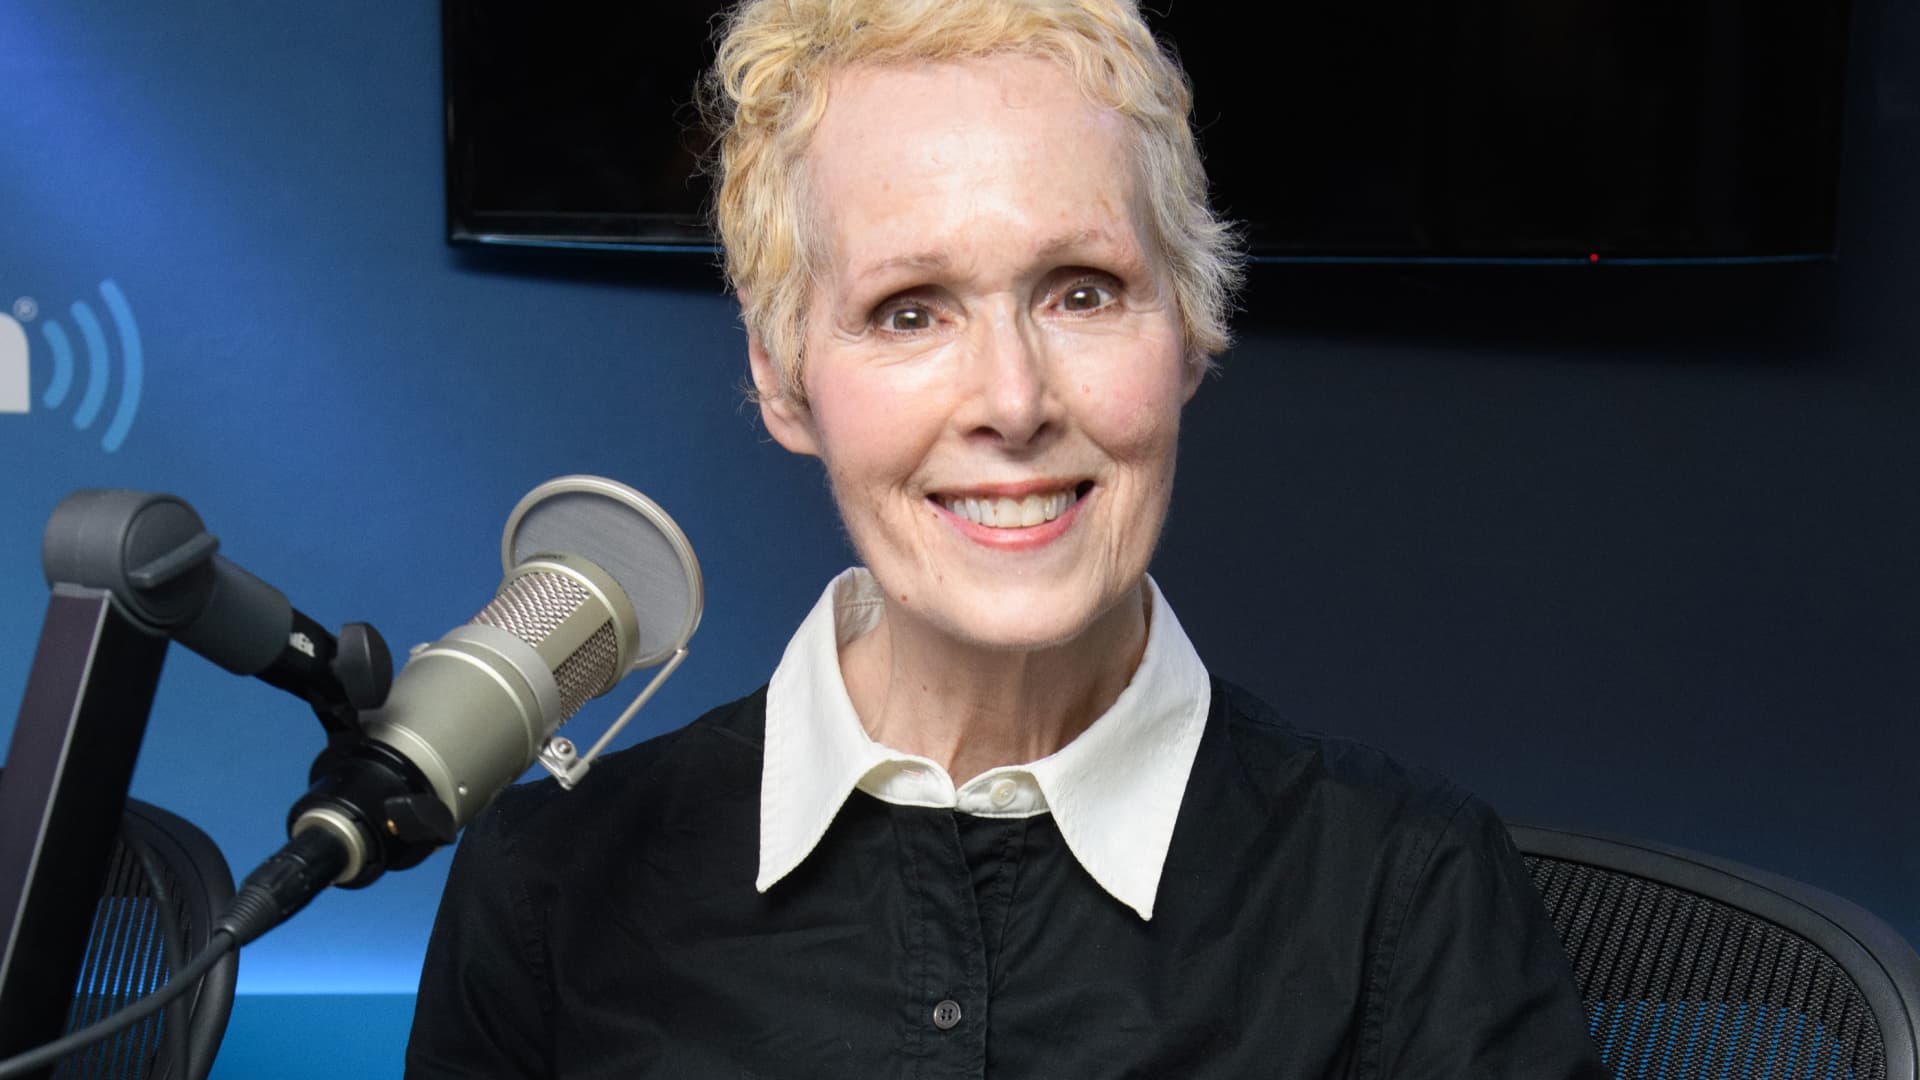 Defamation lawsuit over Trump rape claim by writer E. Jean Carroll set to resume discovery, lawyers say